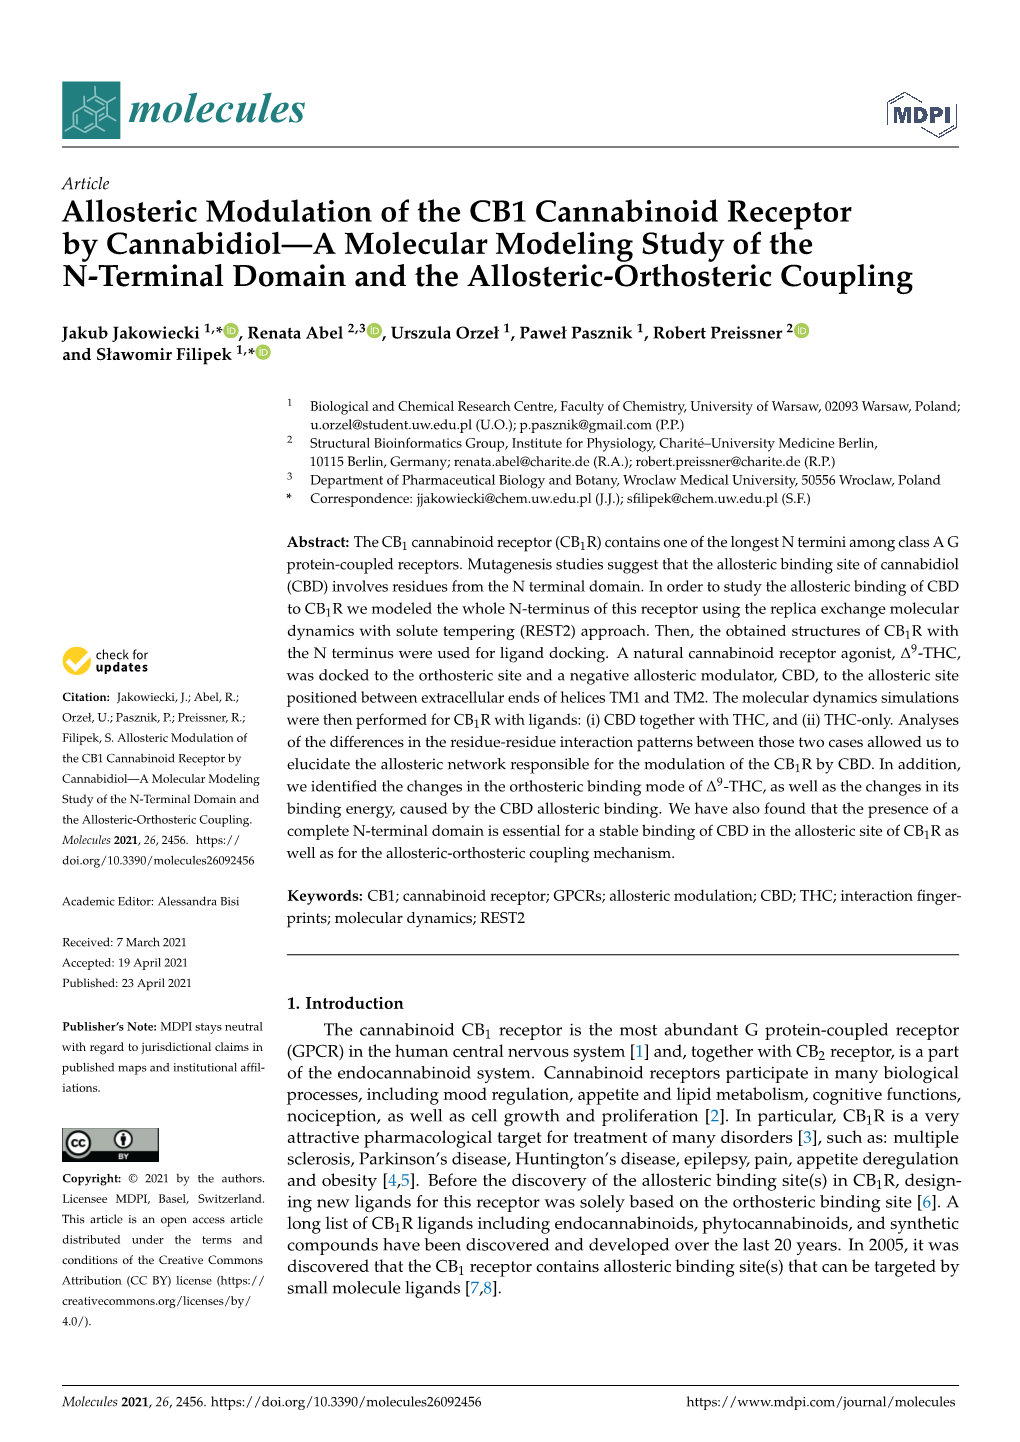 Allosteric Modulation of the CB1 Cannabinoid Receptor by Cannabidiol—A Molecular Modeling Study of the N-Terminal Domain and the Allosteric-Orthosteric Coupling